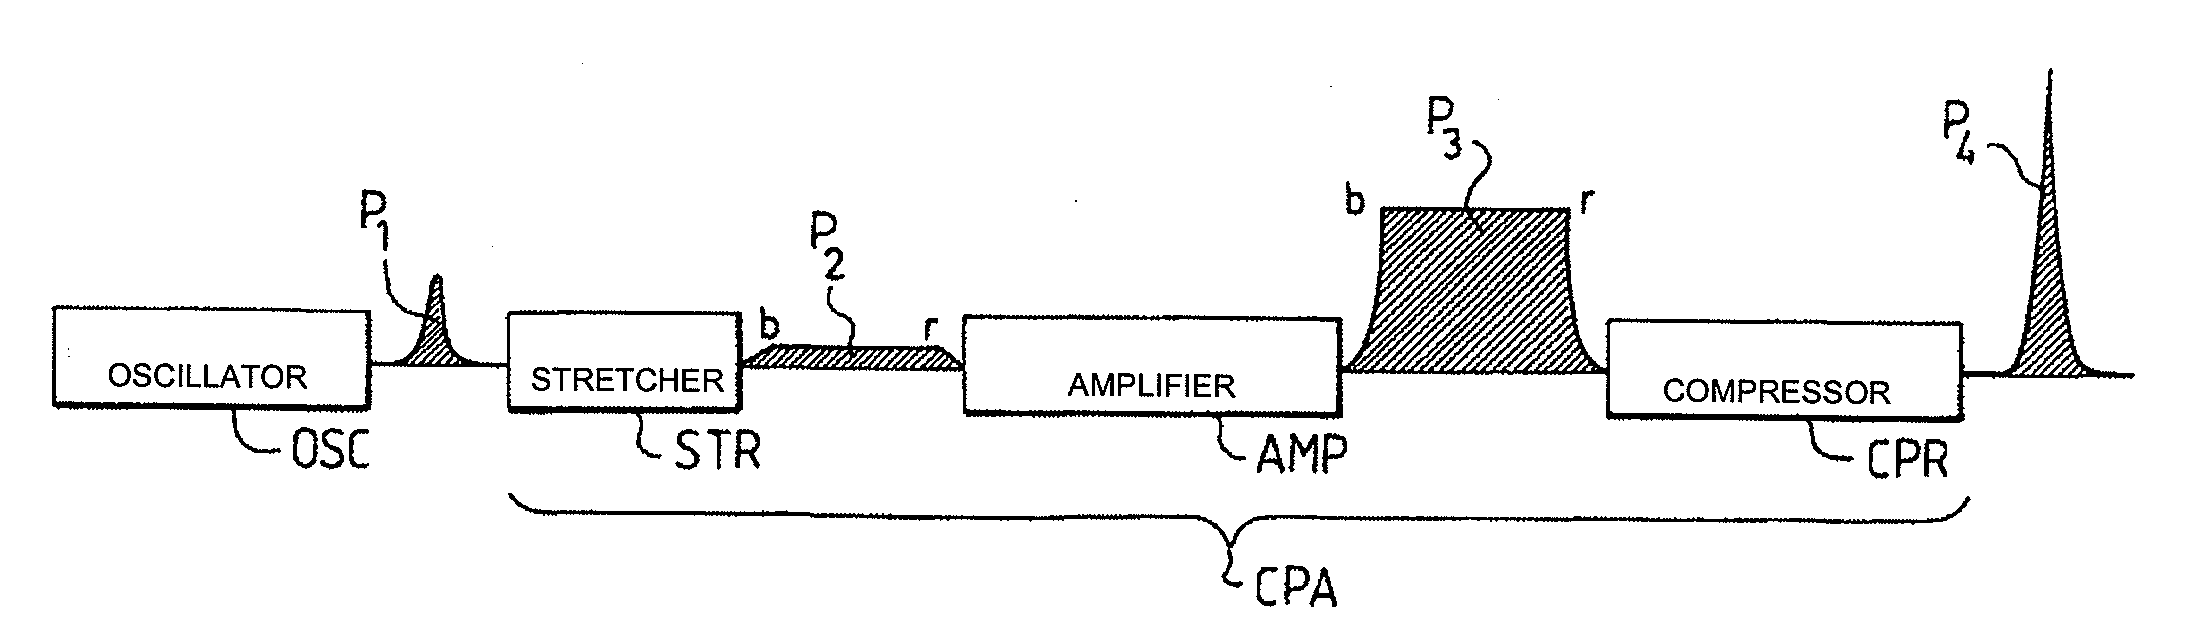 Amplifier Chain for Generating Ultrashort Different Width Light Pulses